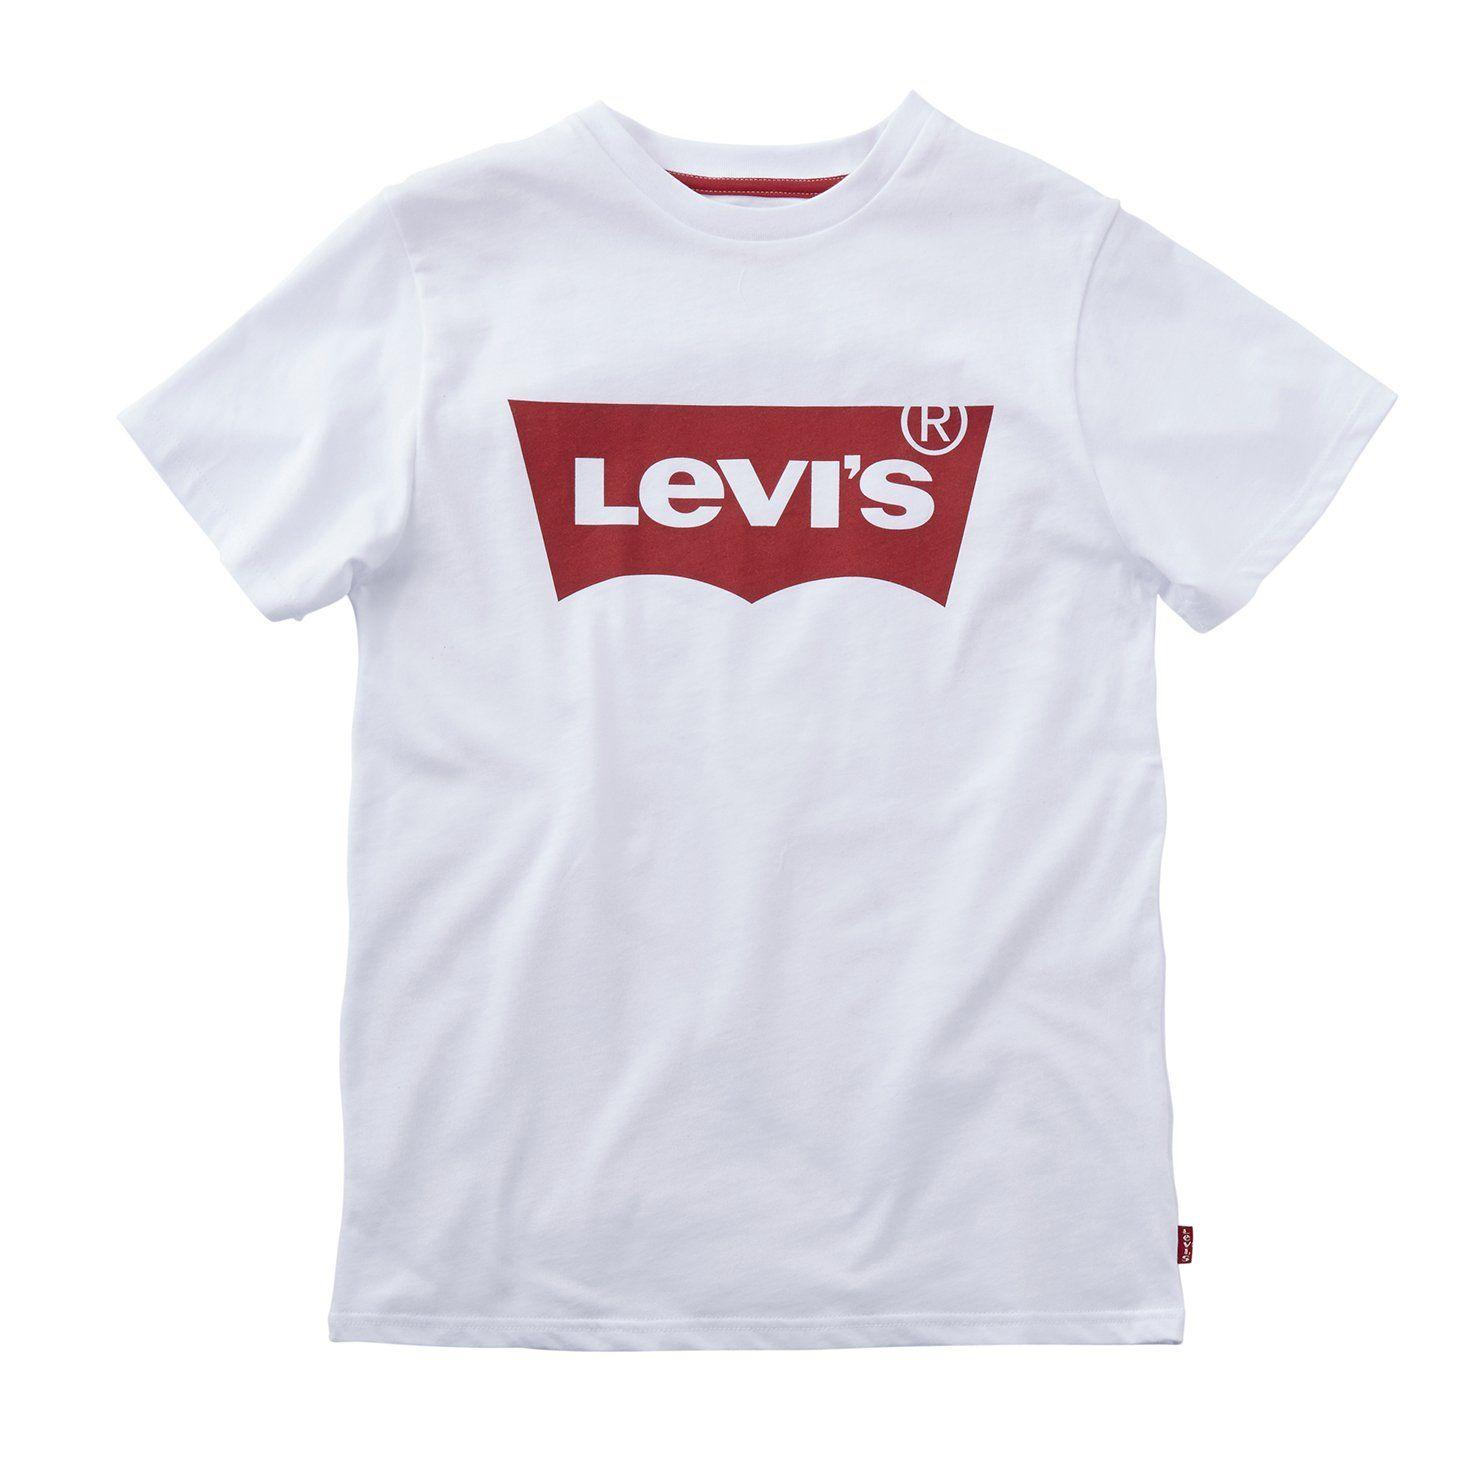 White with Red Logo - SS18 Levi's Boys White & Red Logo T Shirt